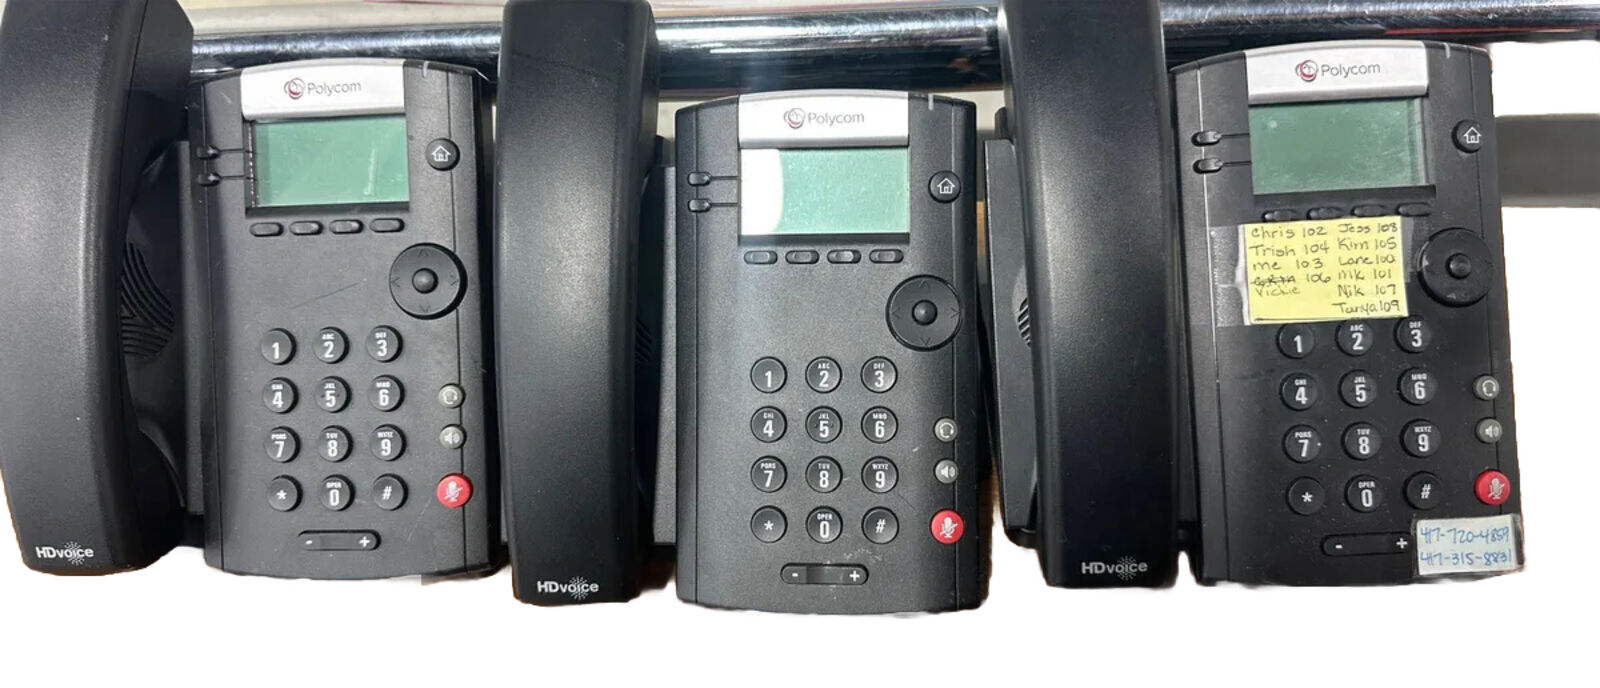 Lot of THREE 3 Polycom VVX 201 VoIP Business/Office Phones - 220140450-001